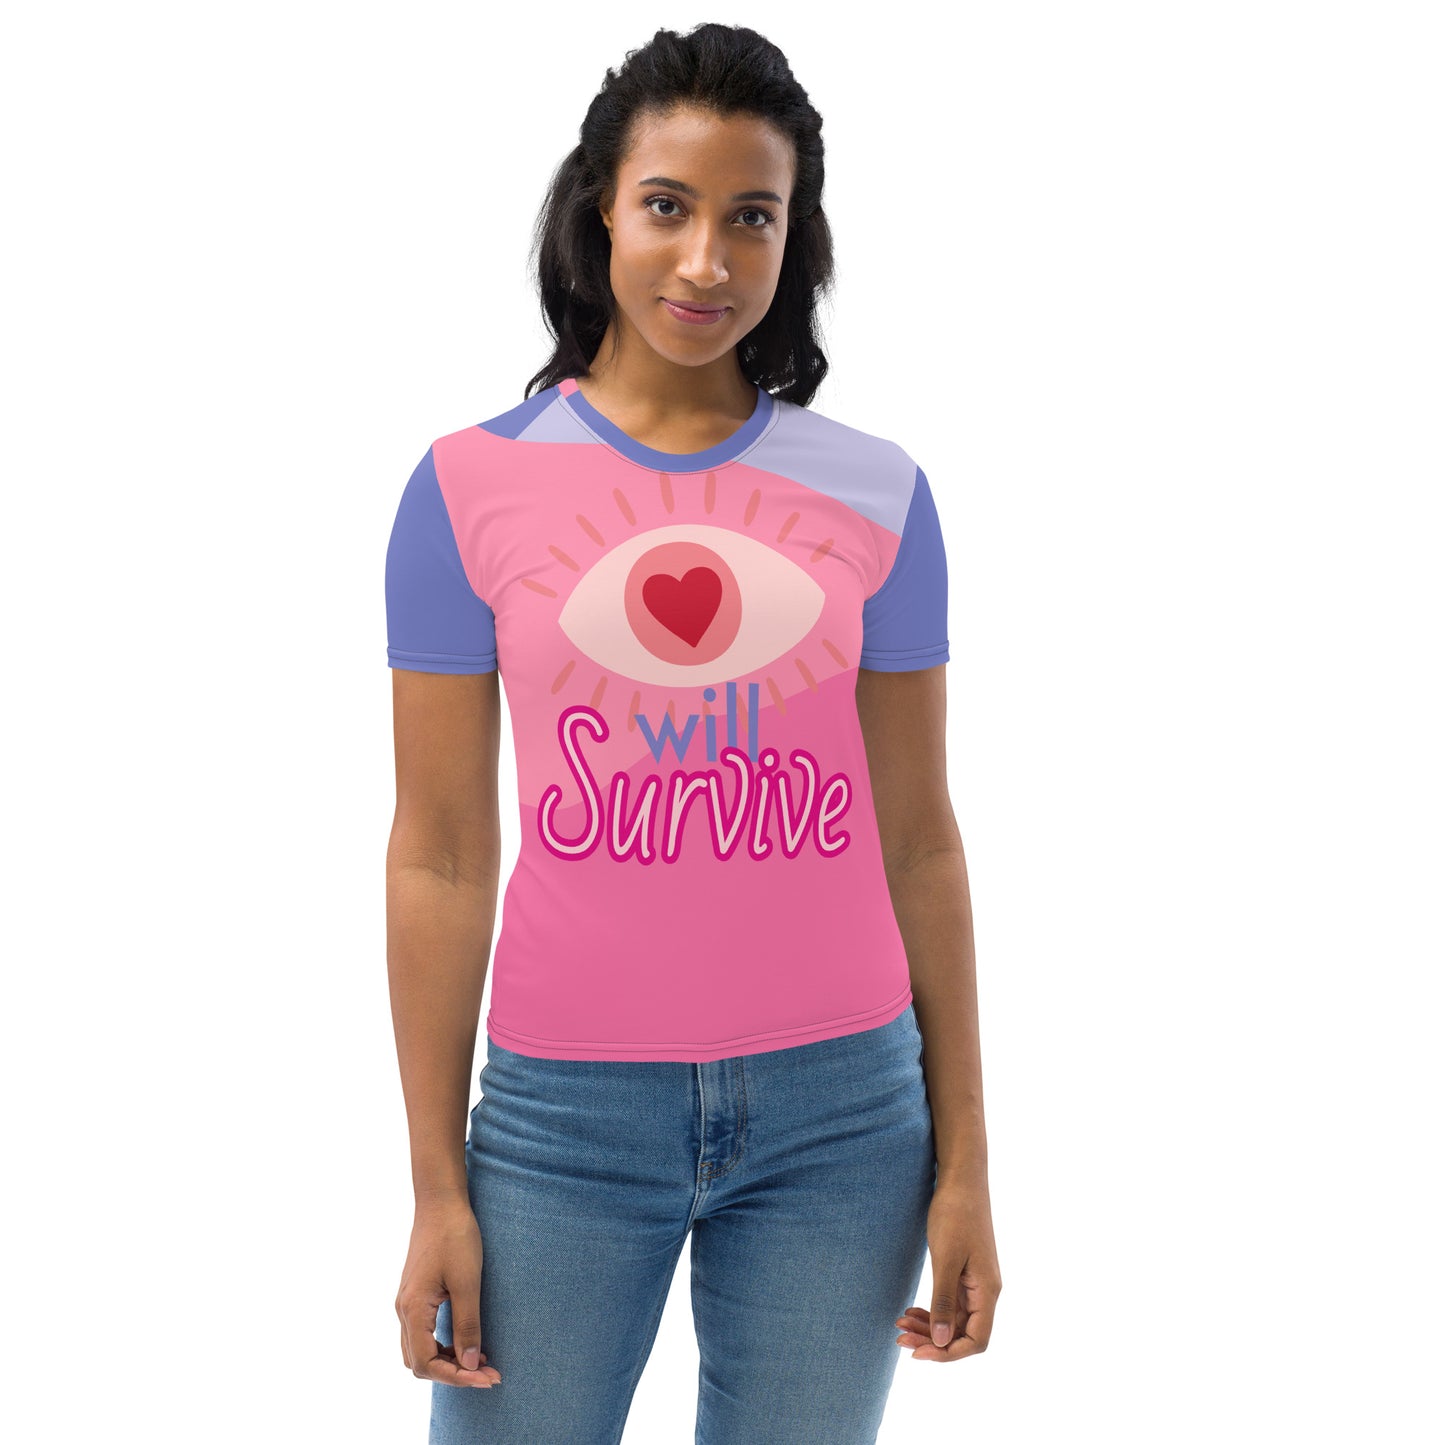 I WILL SURVIVE - All Over Print/Women's T-shirt